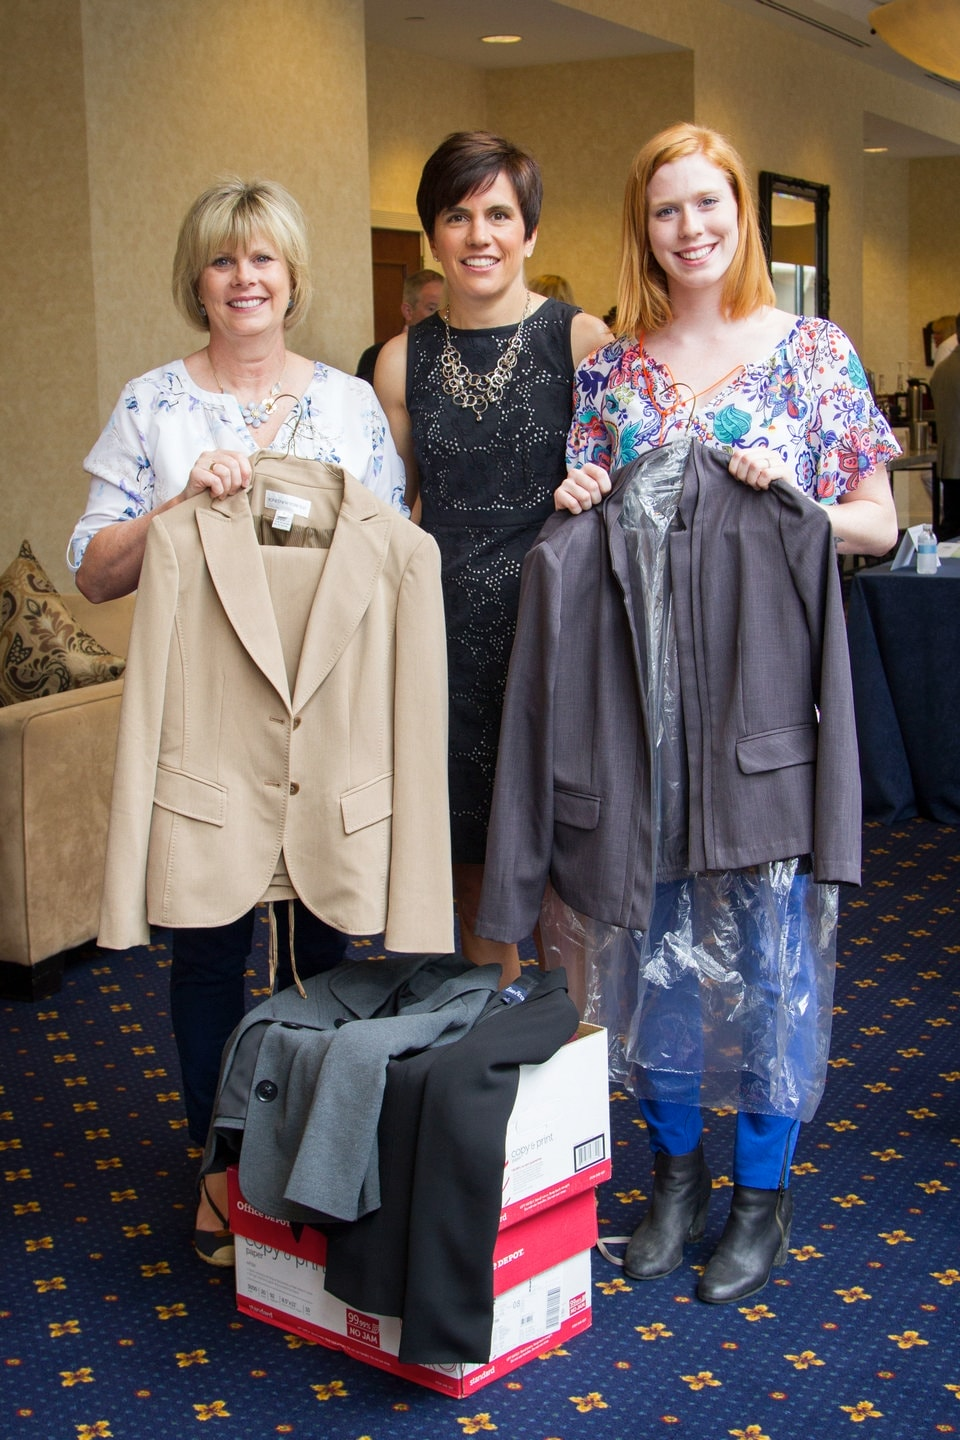 Carla Rawheiser, R.D.H. (left) and her daughter Becca, 21, (right) a student at the University of Delaware presented clothing donations for Dress For Success to Julie Radzyminski, Benco Dental’s director of business innovation and the coordinator of the Lucy Hobbs Project.